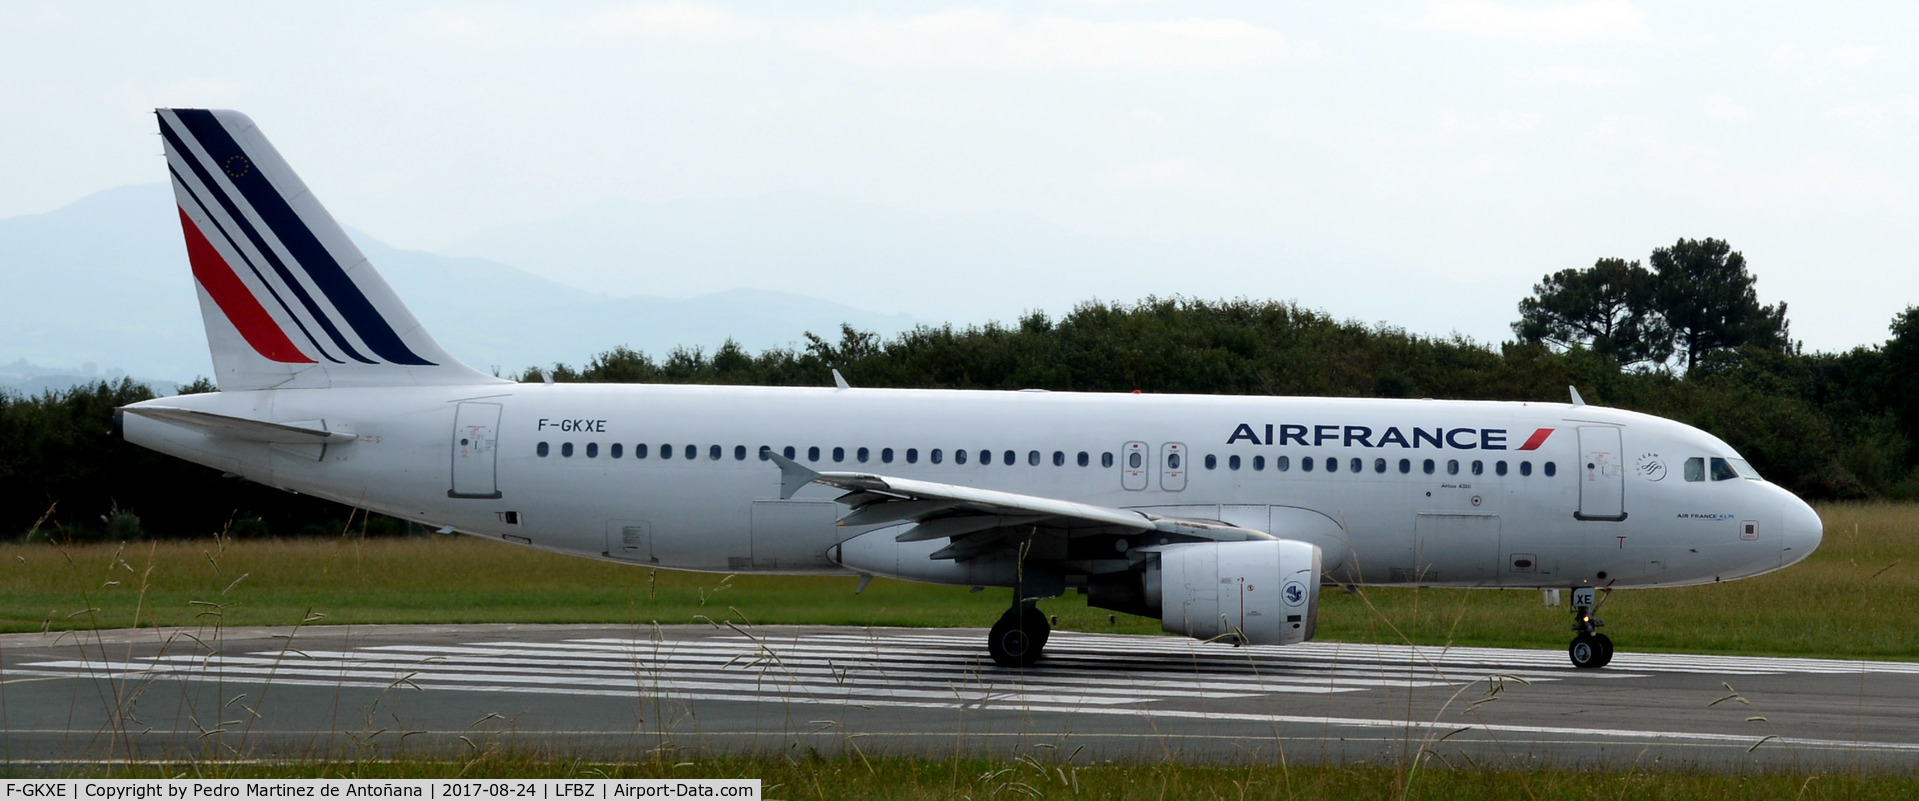 F-GKXE, 2002 Airbus A320-214 C/N 1879, Aéroport  Biarritz-Anglet-Bayonne